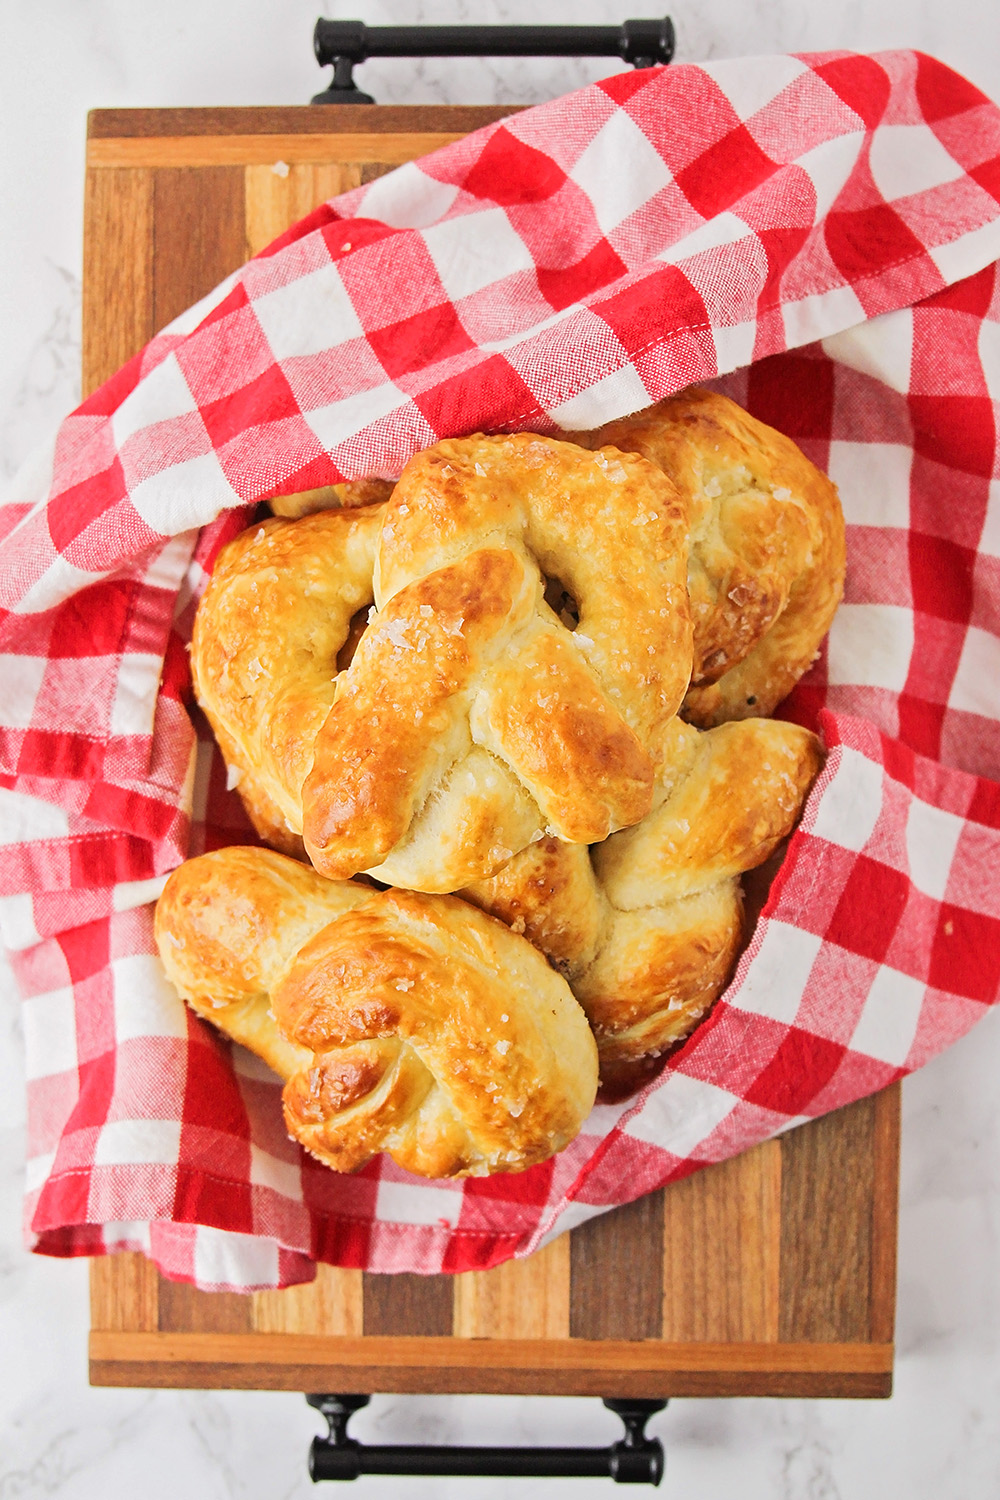 These homemade soft pretzels are just as delicious as the pretzels from the mall, and so fun to make!